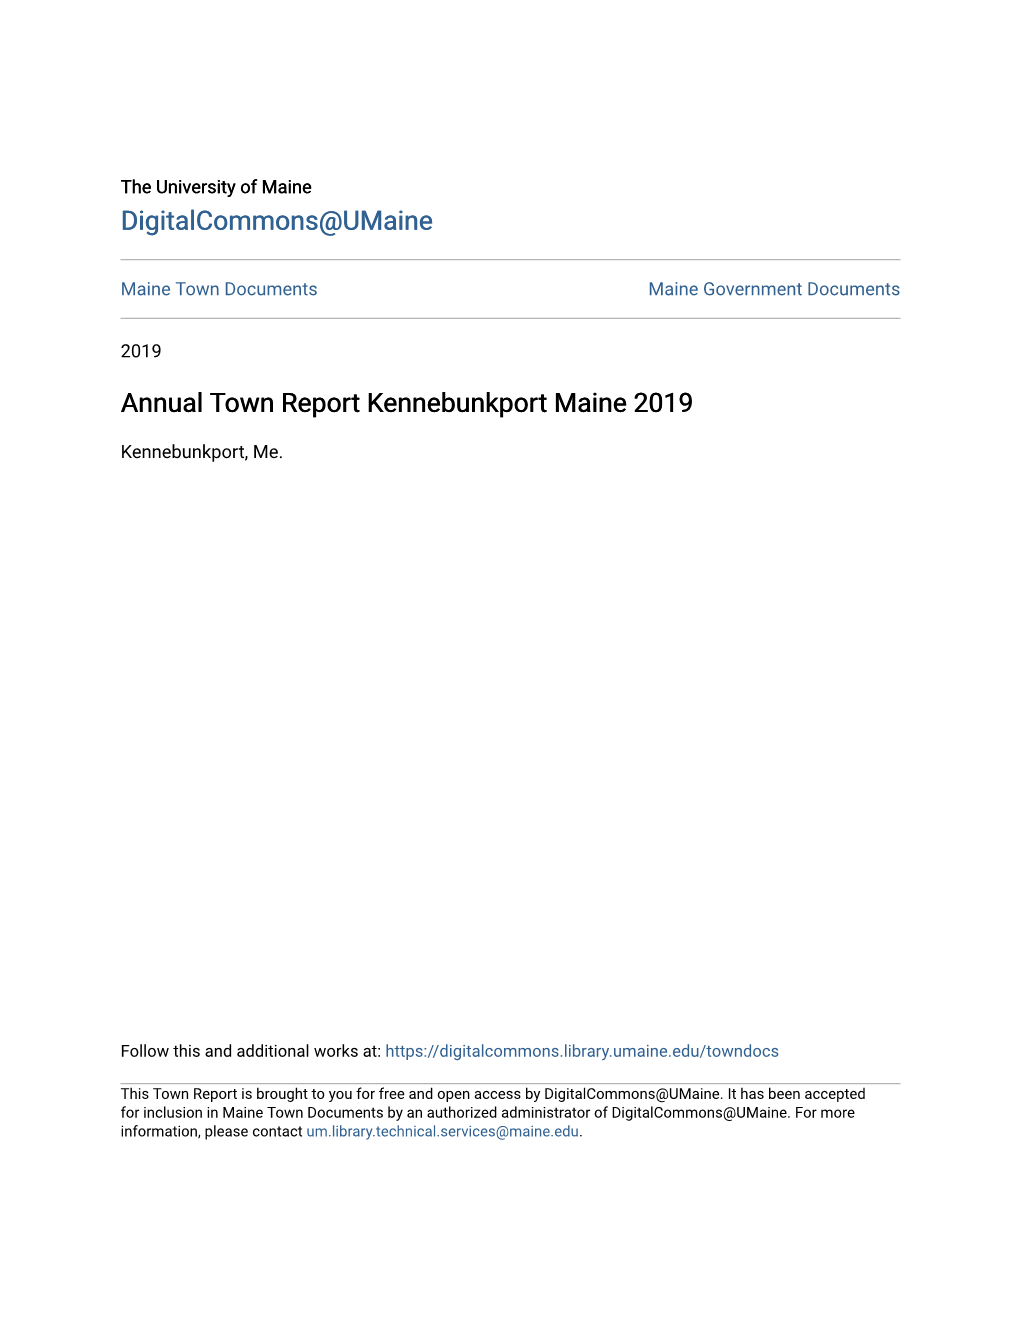 Annual Town Report Kennebunkport Maine 2019